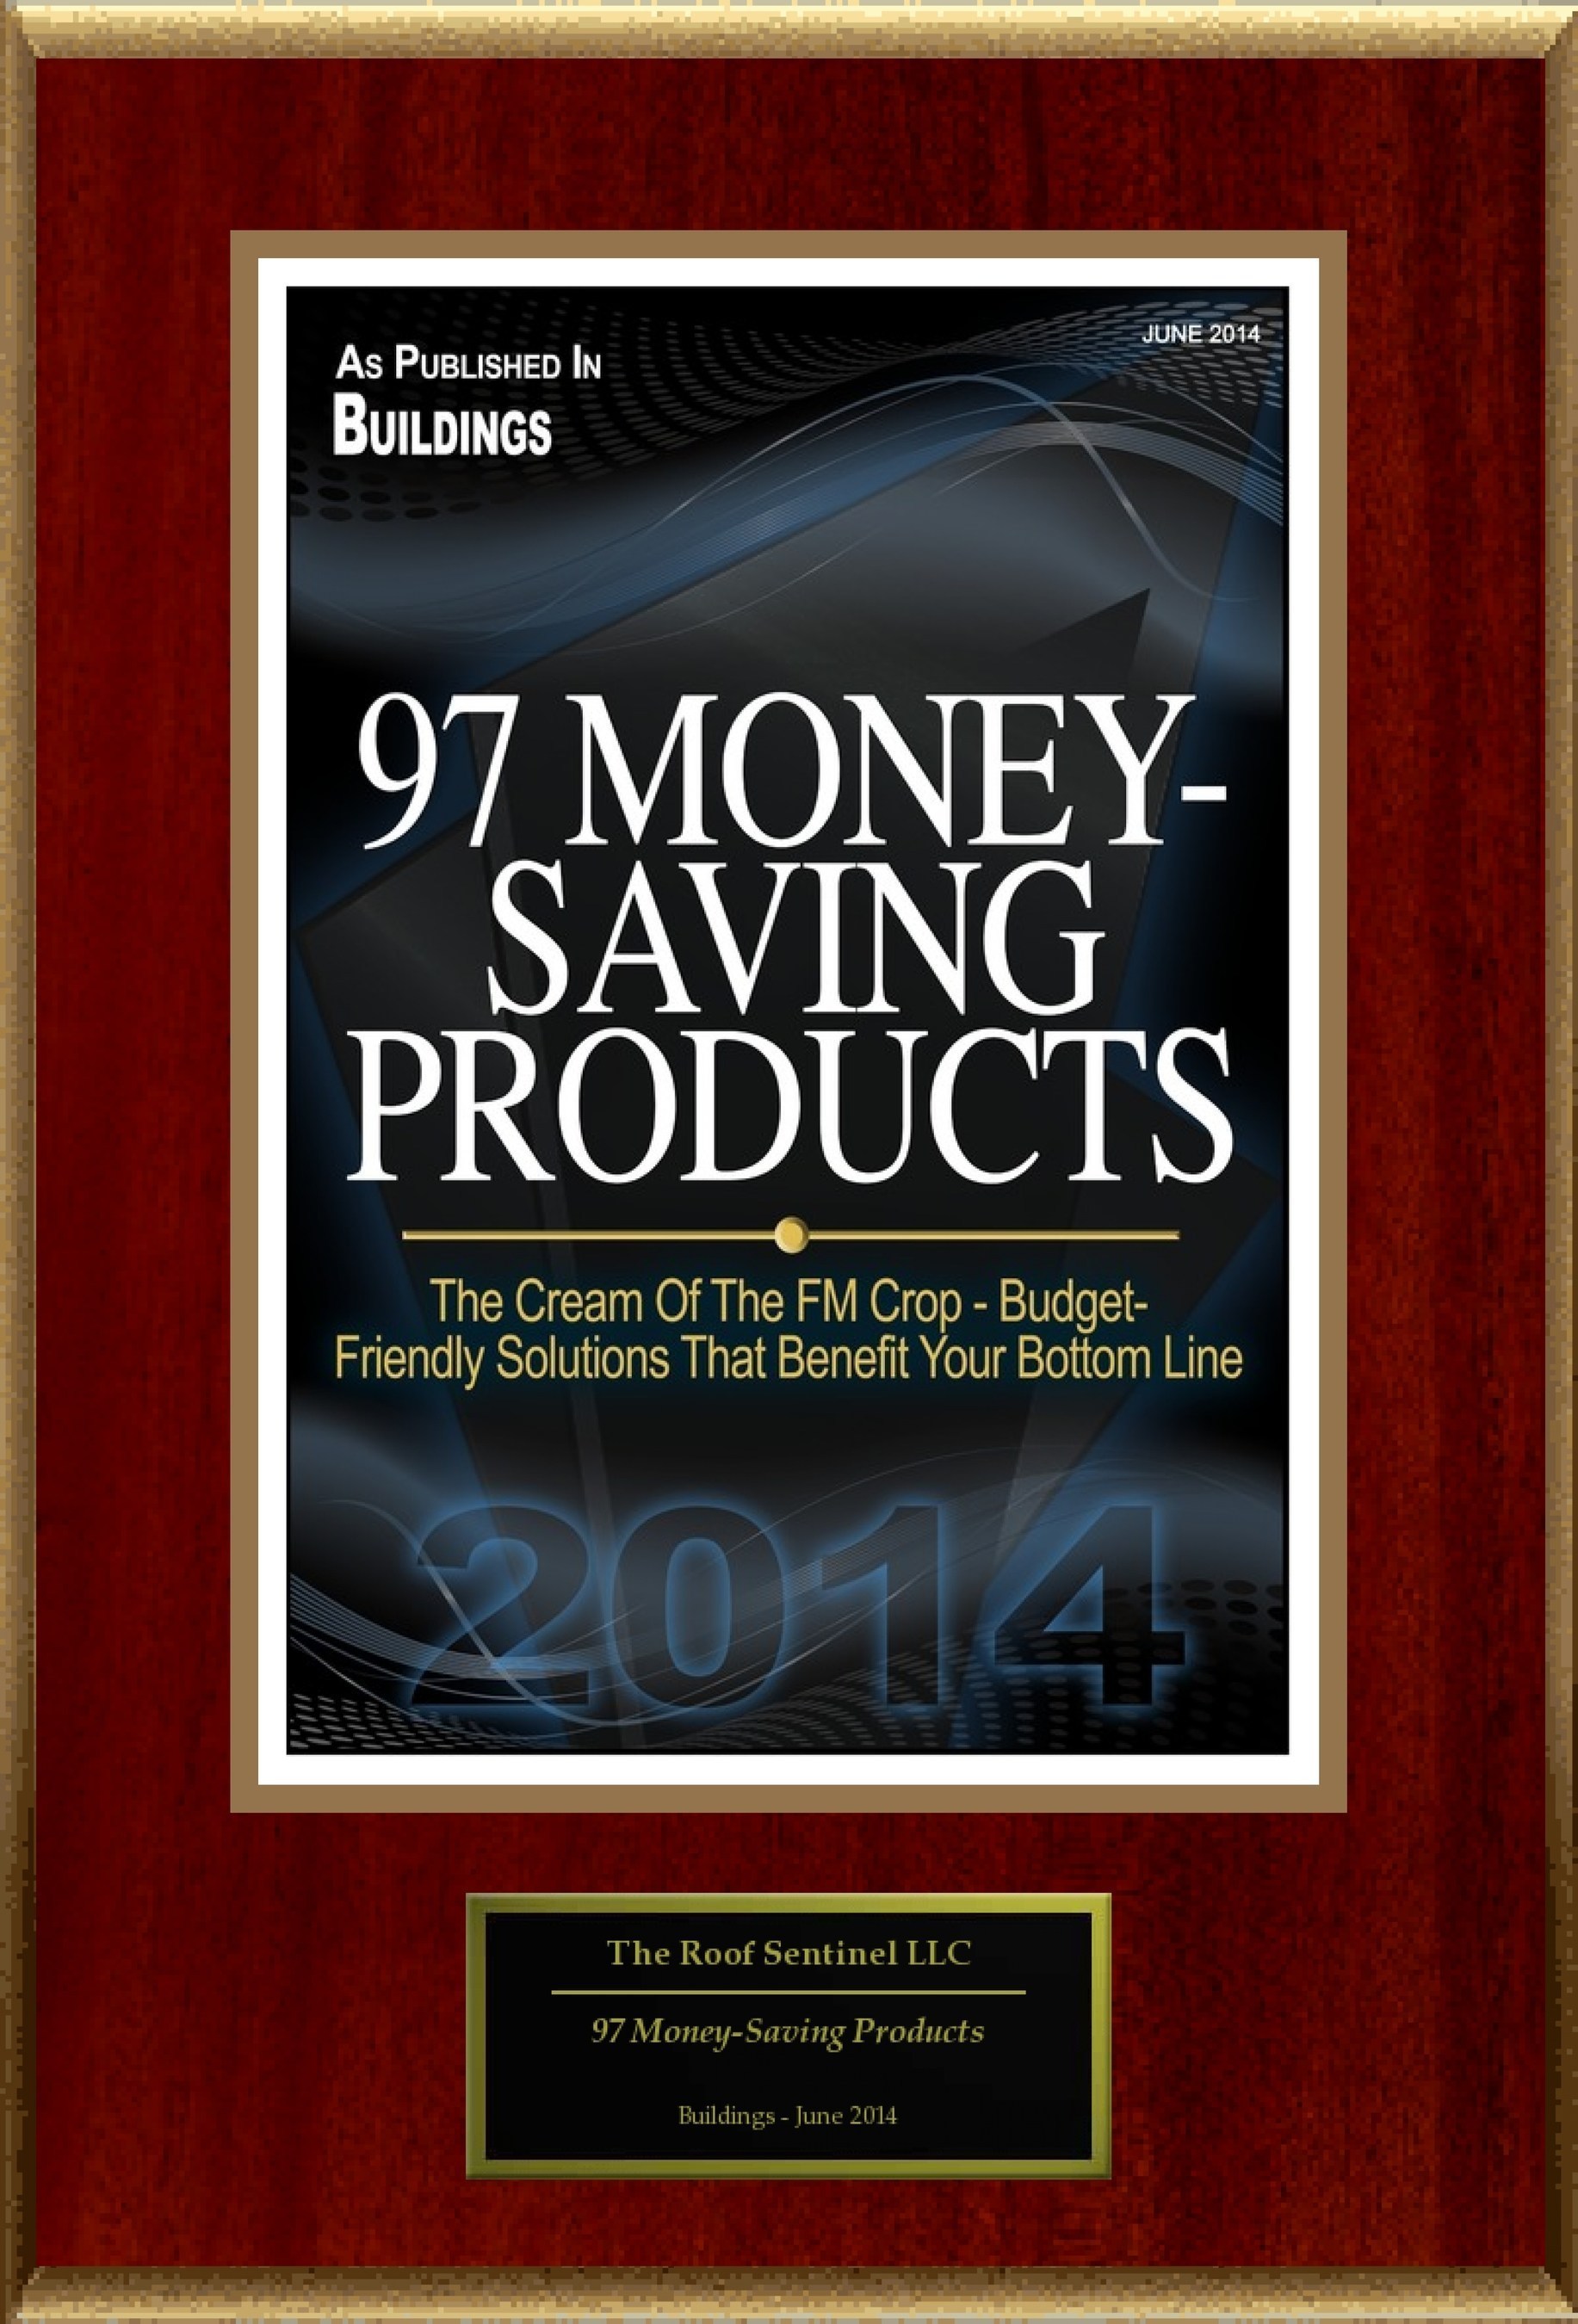 The Roof Sentinel LLC Selected For "97 Money-Saving Products" (PRNewsFoto/The Roof Sentinel LLC)